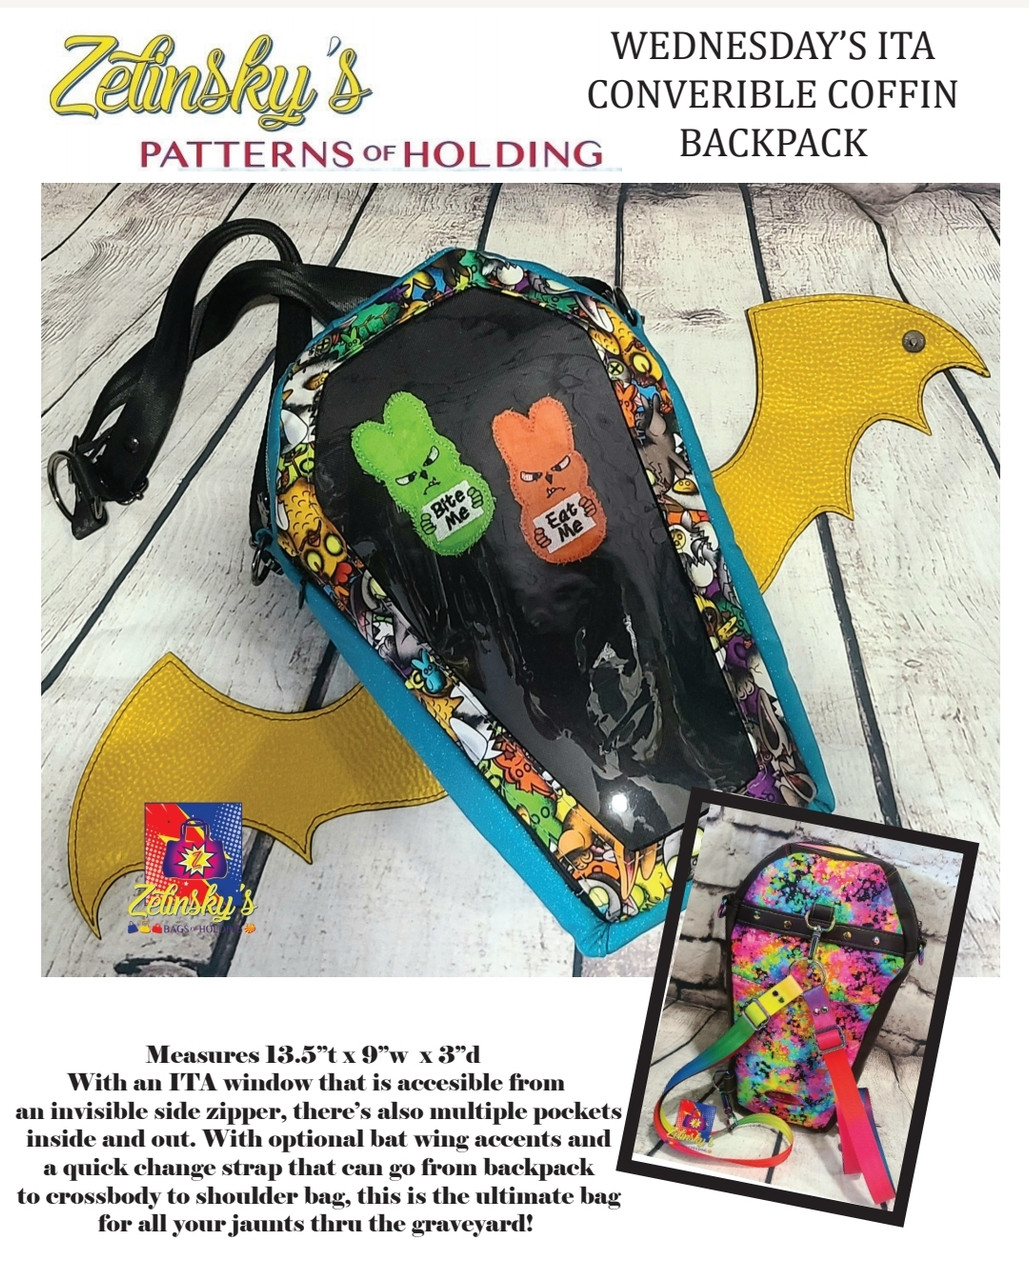 The Switch convertible backpack and cross-body bag PDF sewing